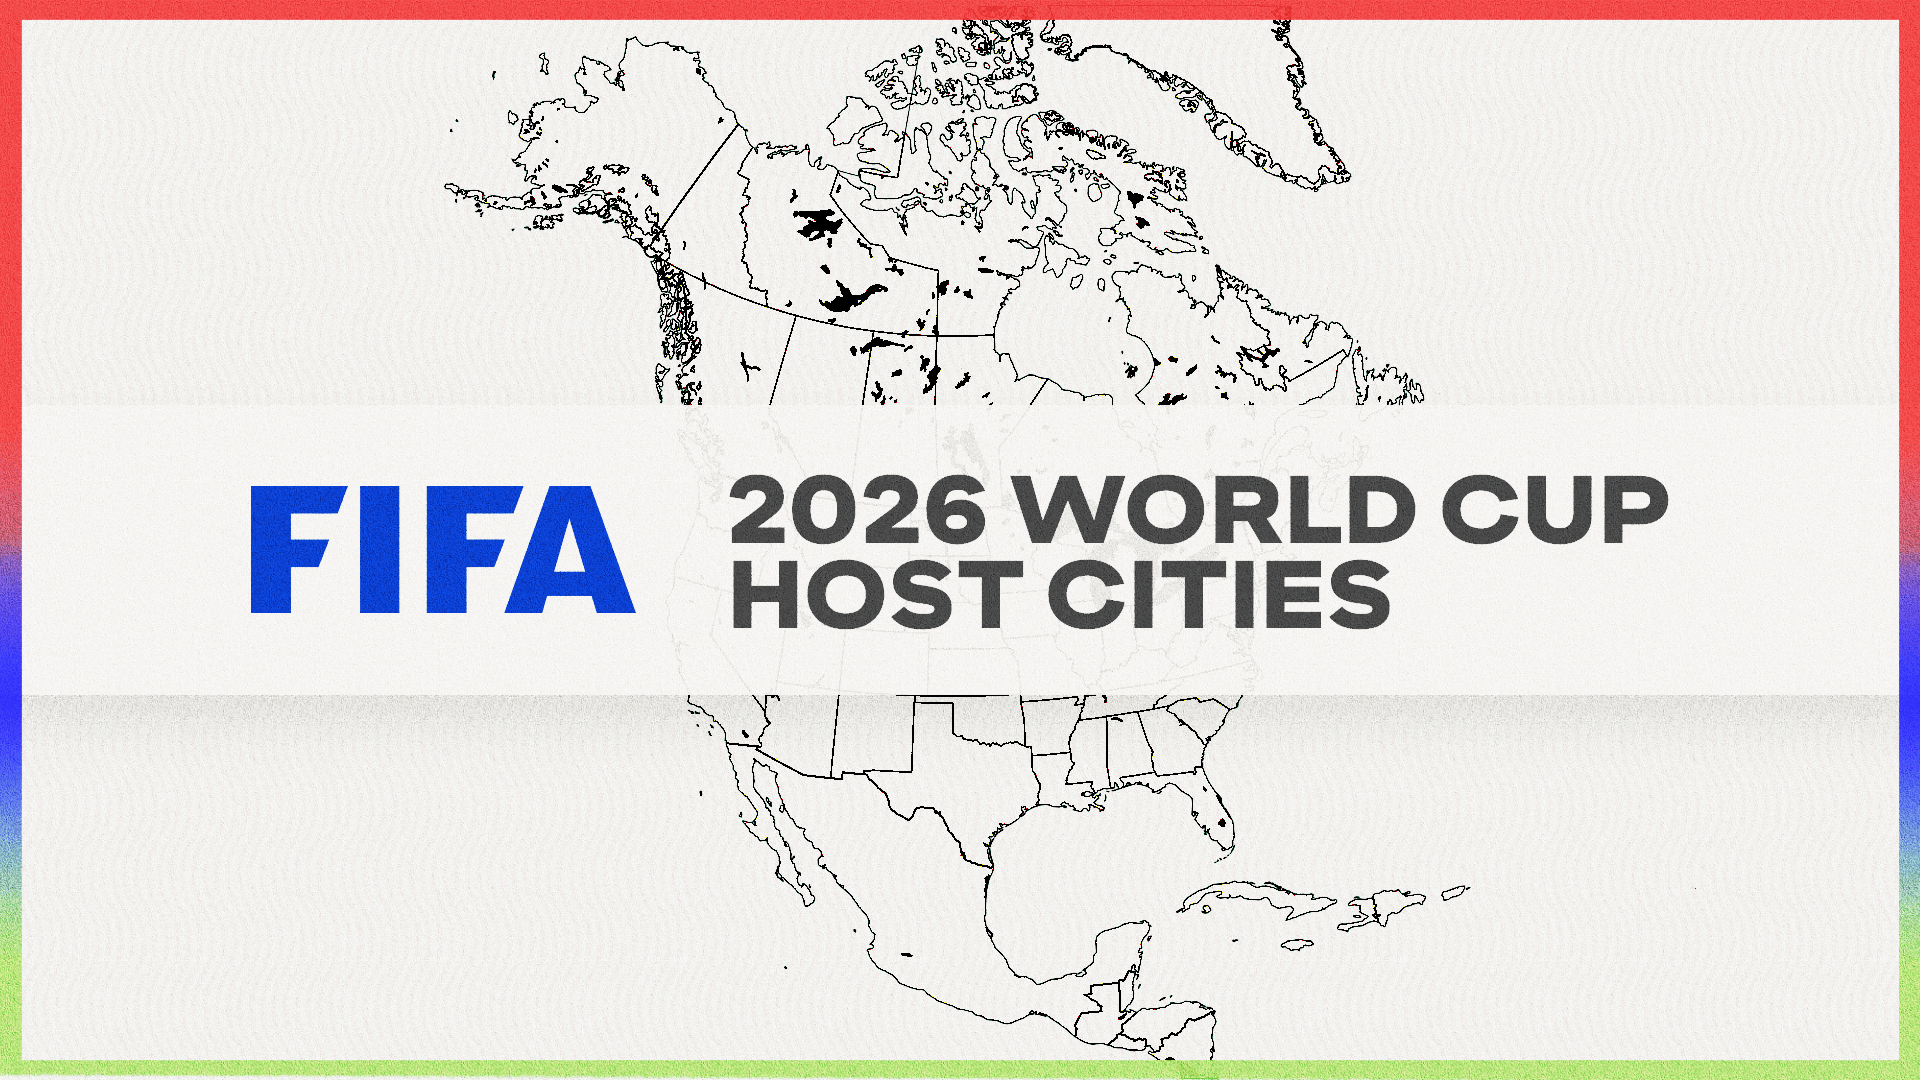 FIFA names 16 host cities for the 2026 World Cup - MLSSoccer.com